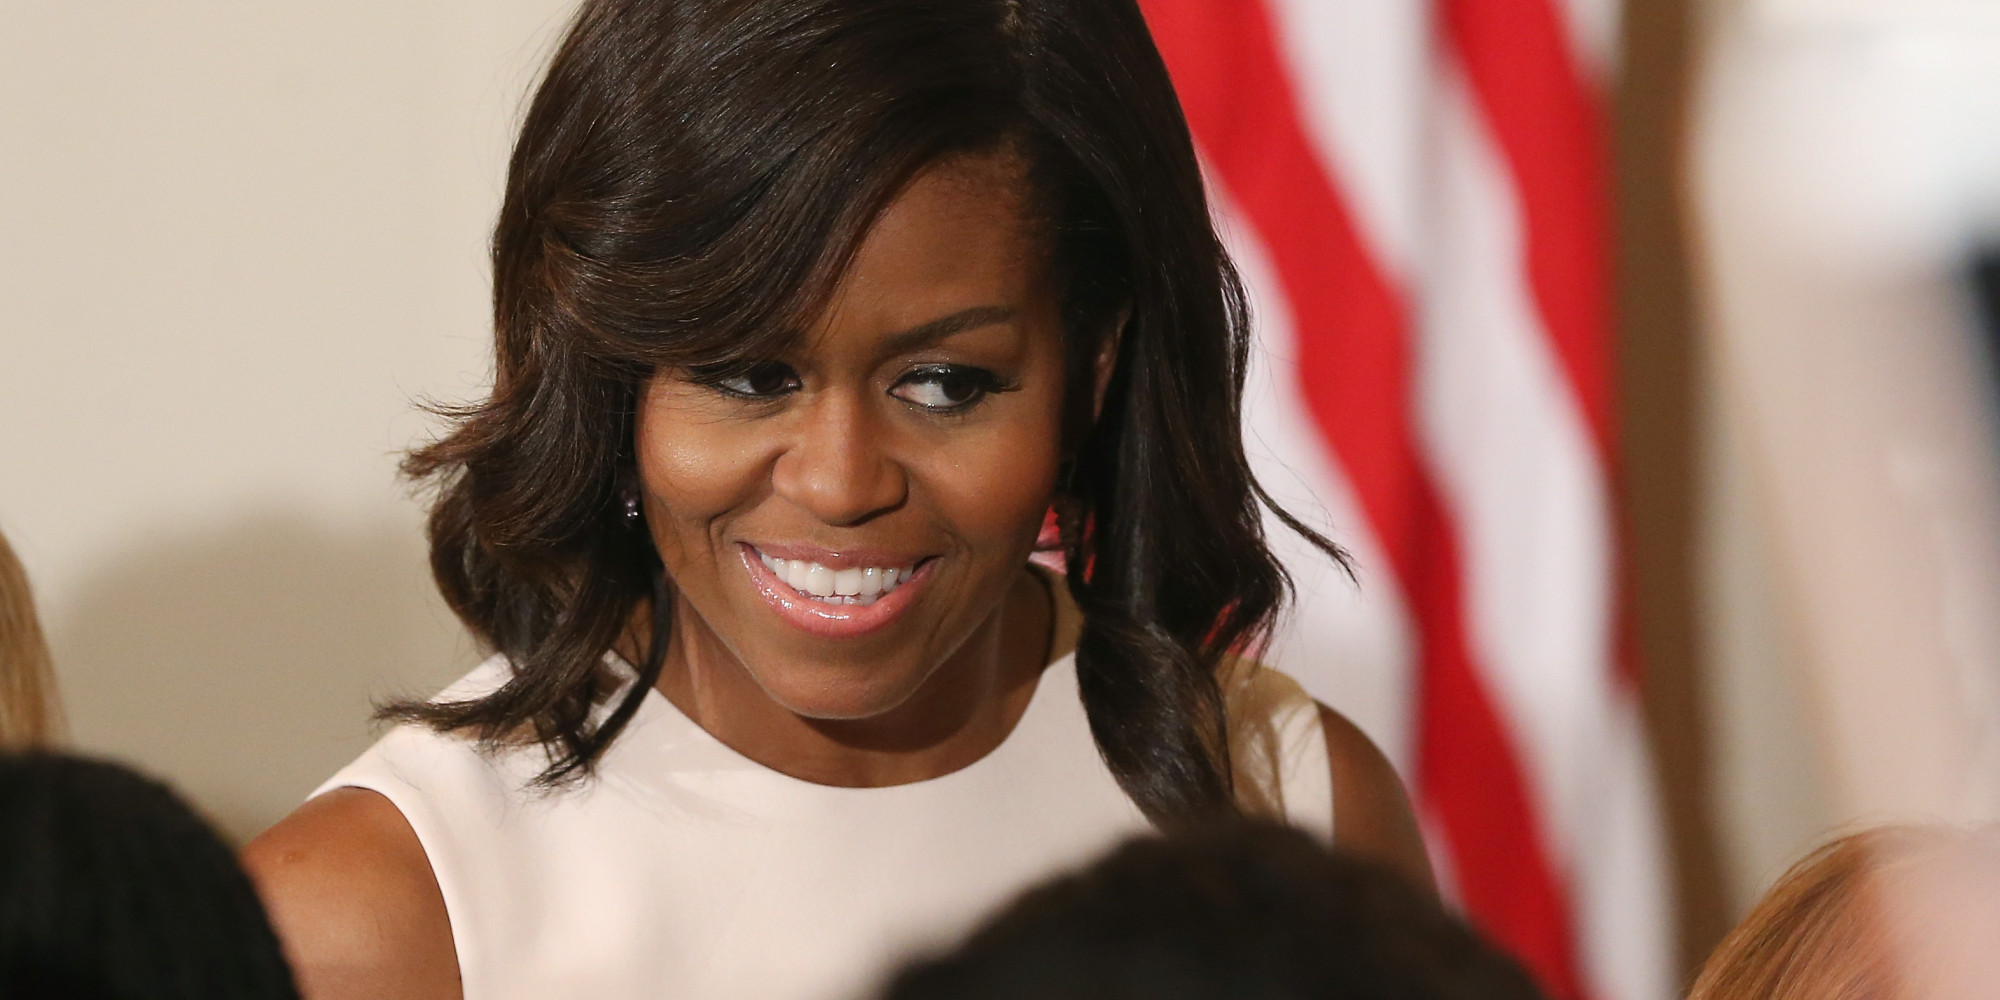 Michelle Obamas Curly Hair And More Celebrity Beauty Looks We